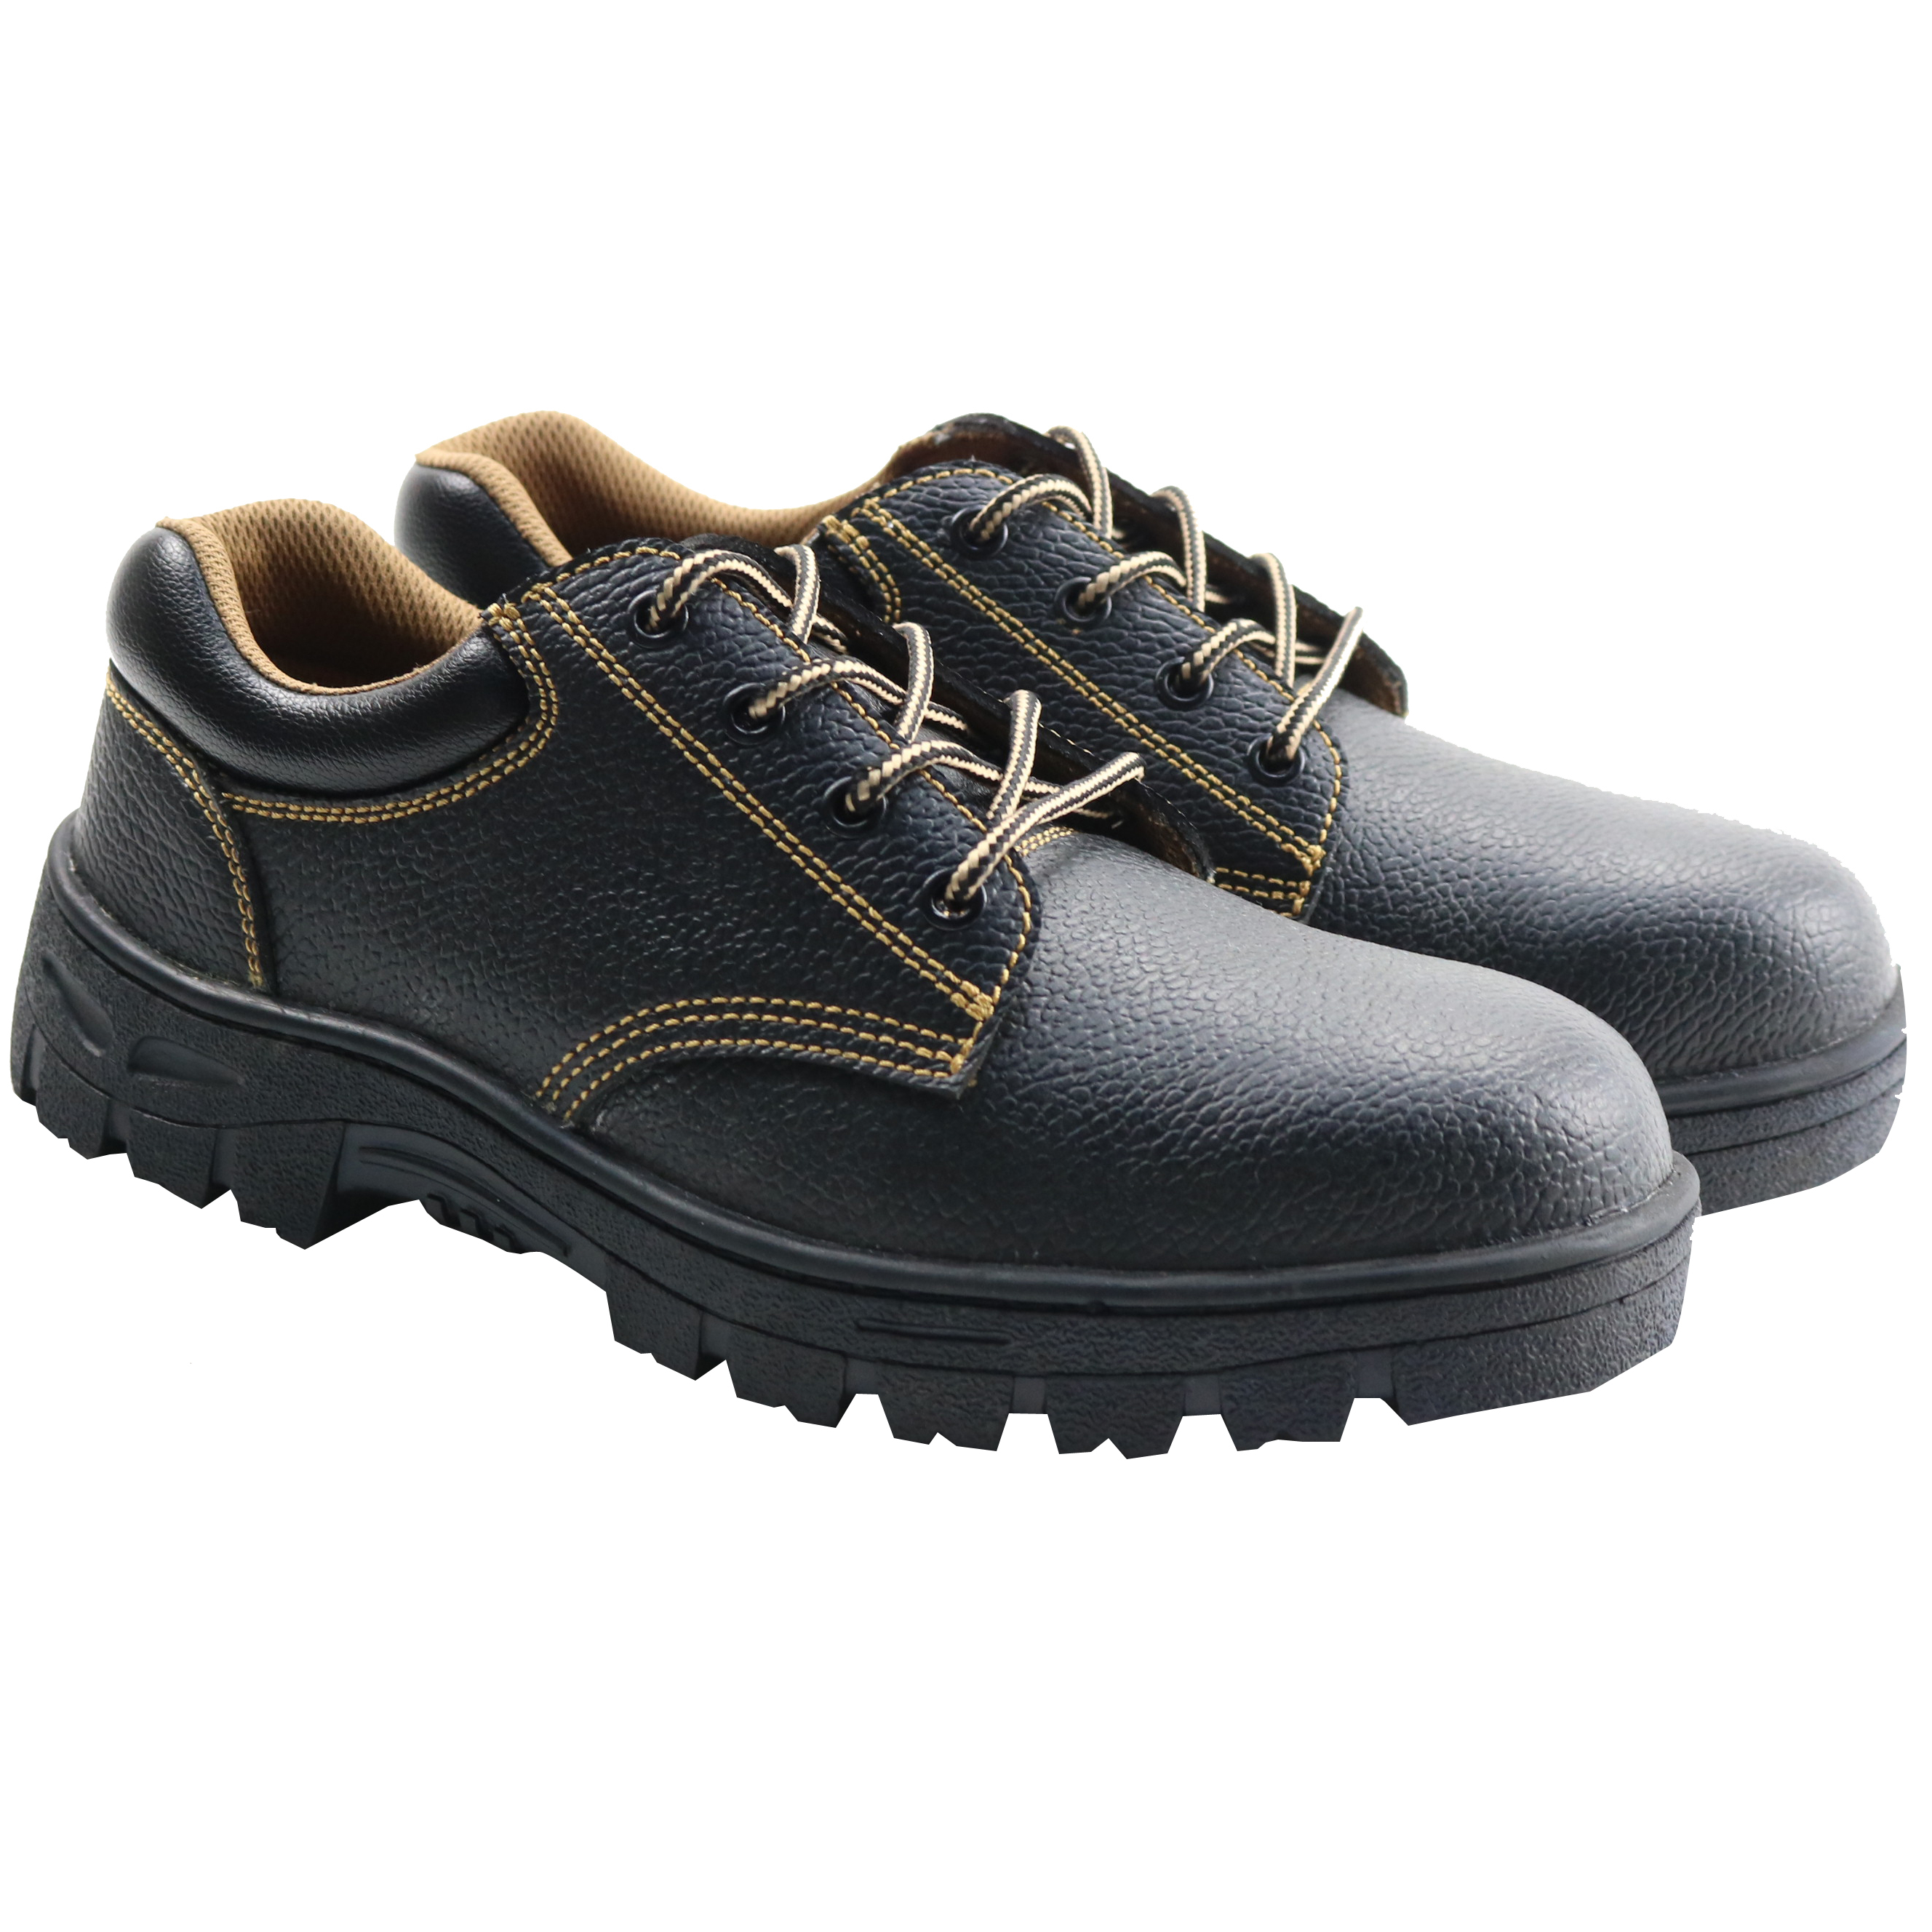 S1P Standard PU  Anti-Smashing Anti-Piercing Non-Slip Work Industrial Safety Shoes Featured Image